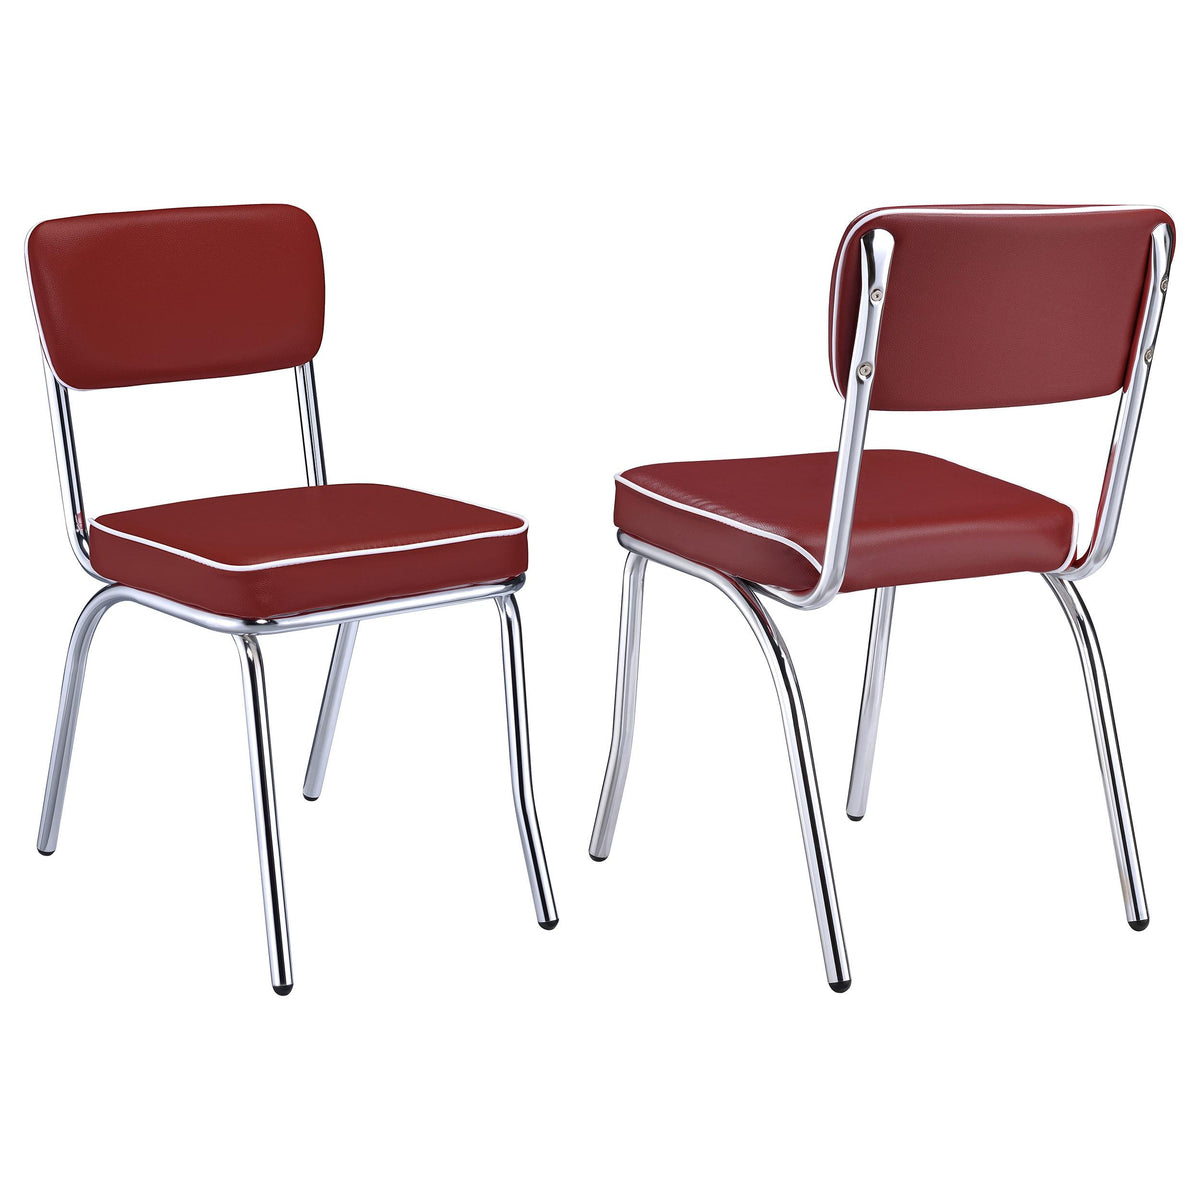 Retro Open Back Side Chairs Red and Chrome (Set of 2) Retro Open Back Side Chairs Red and Chrome (Set of 2) Half Price Furniture